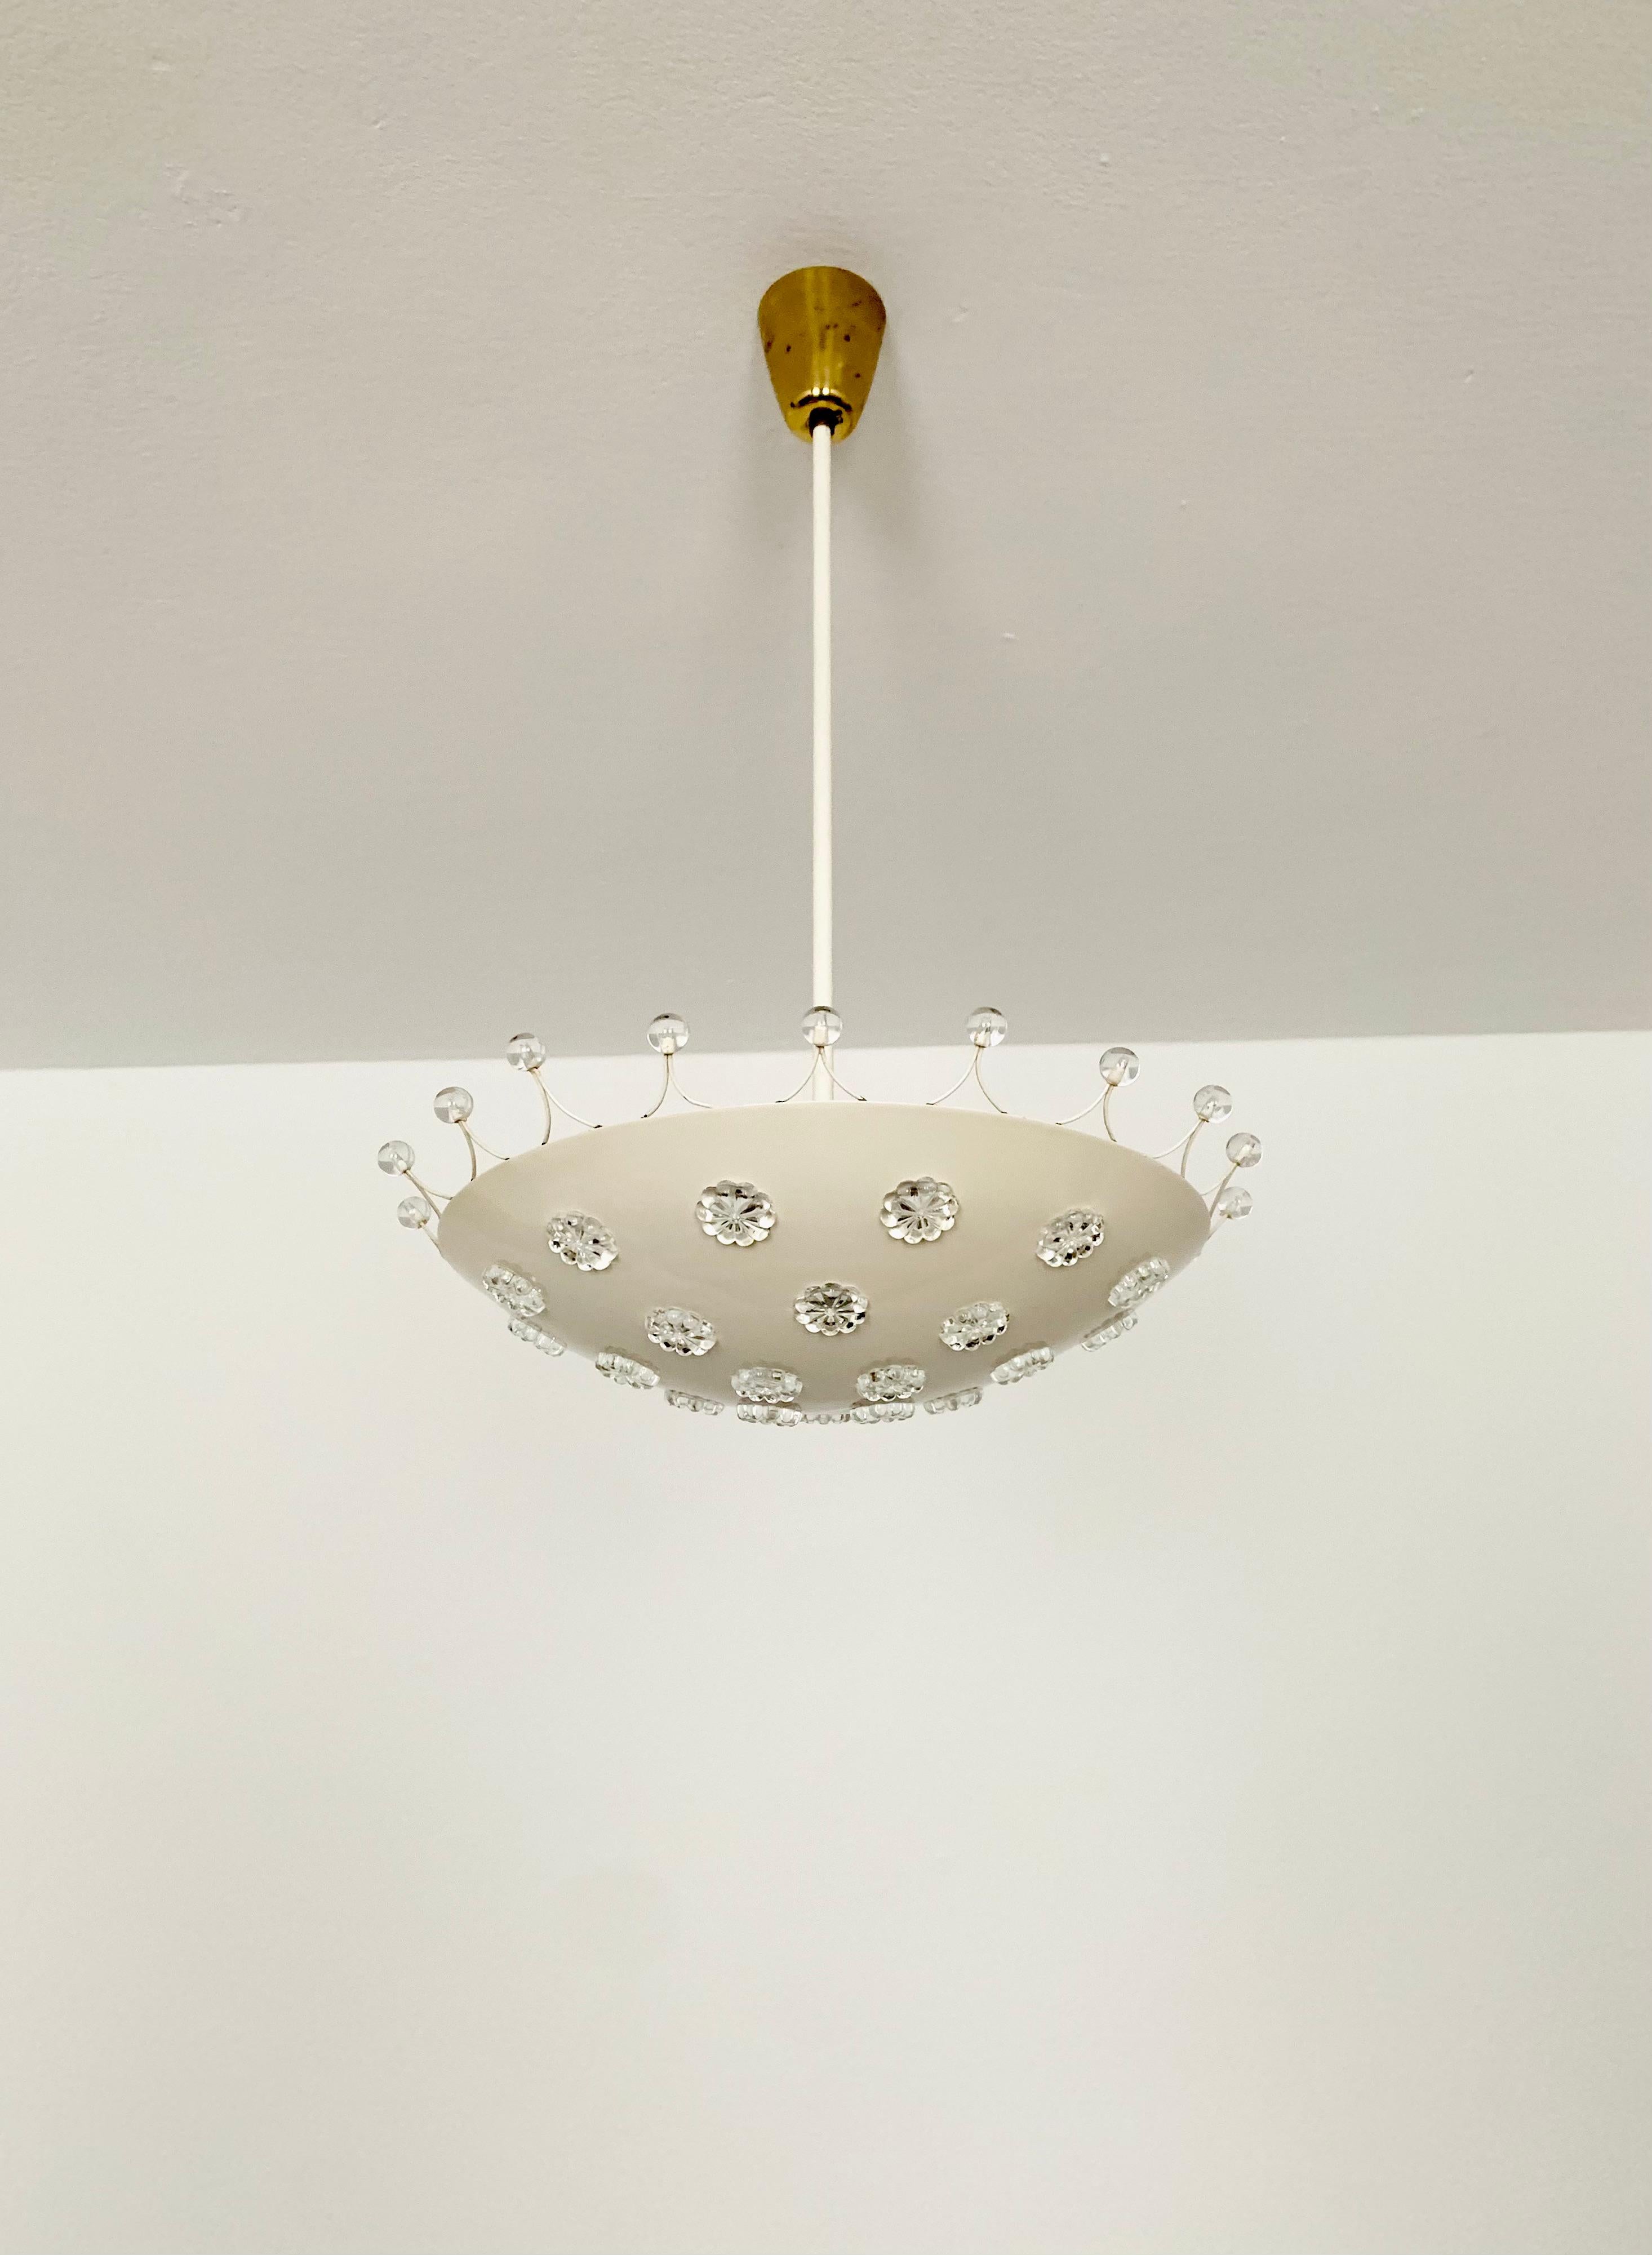 Wonderful ceiling lamp from the 1950s.
The lamp with the crystal glass flowers has a very luxurious look and sparkles particularly beautifully.
The design and the materials used create a great glittering light.
A stunning lamp and a real addition to